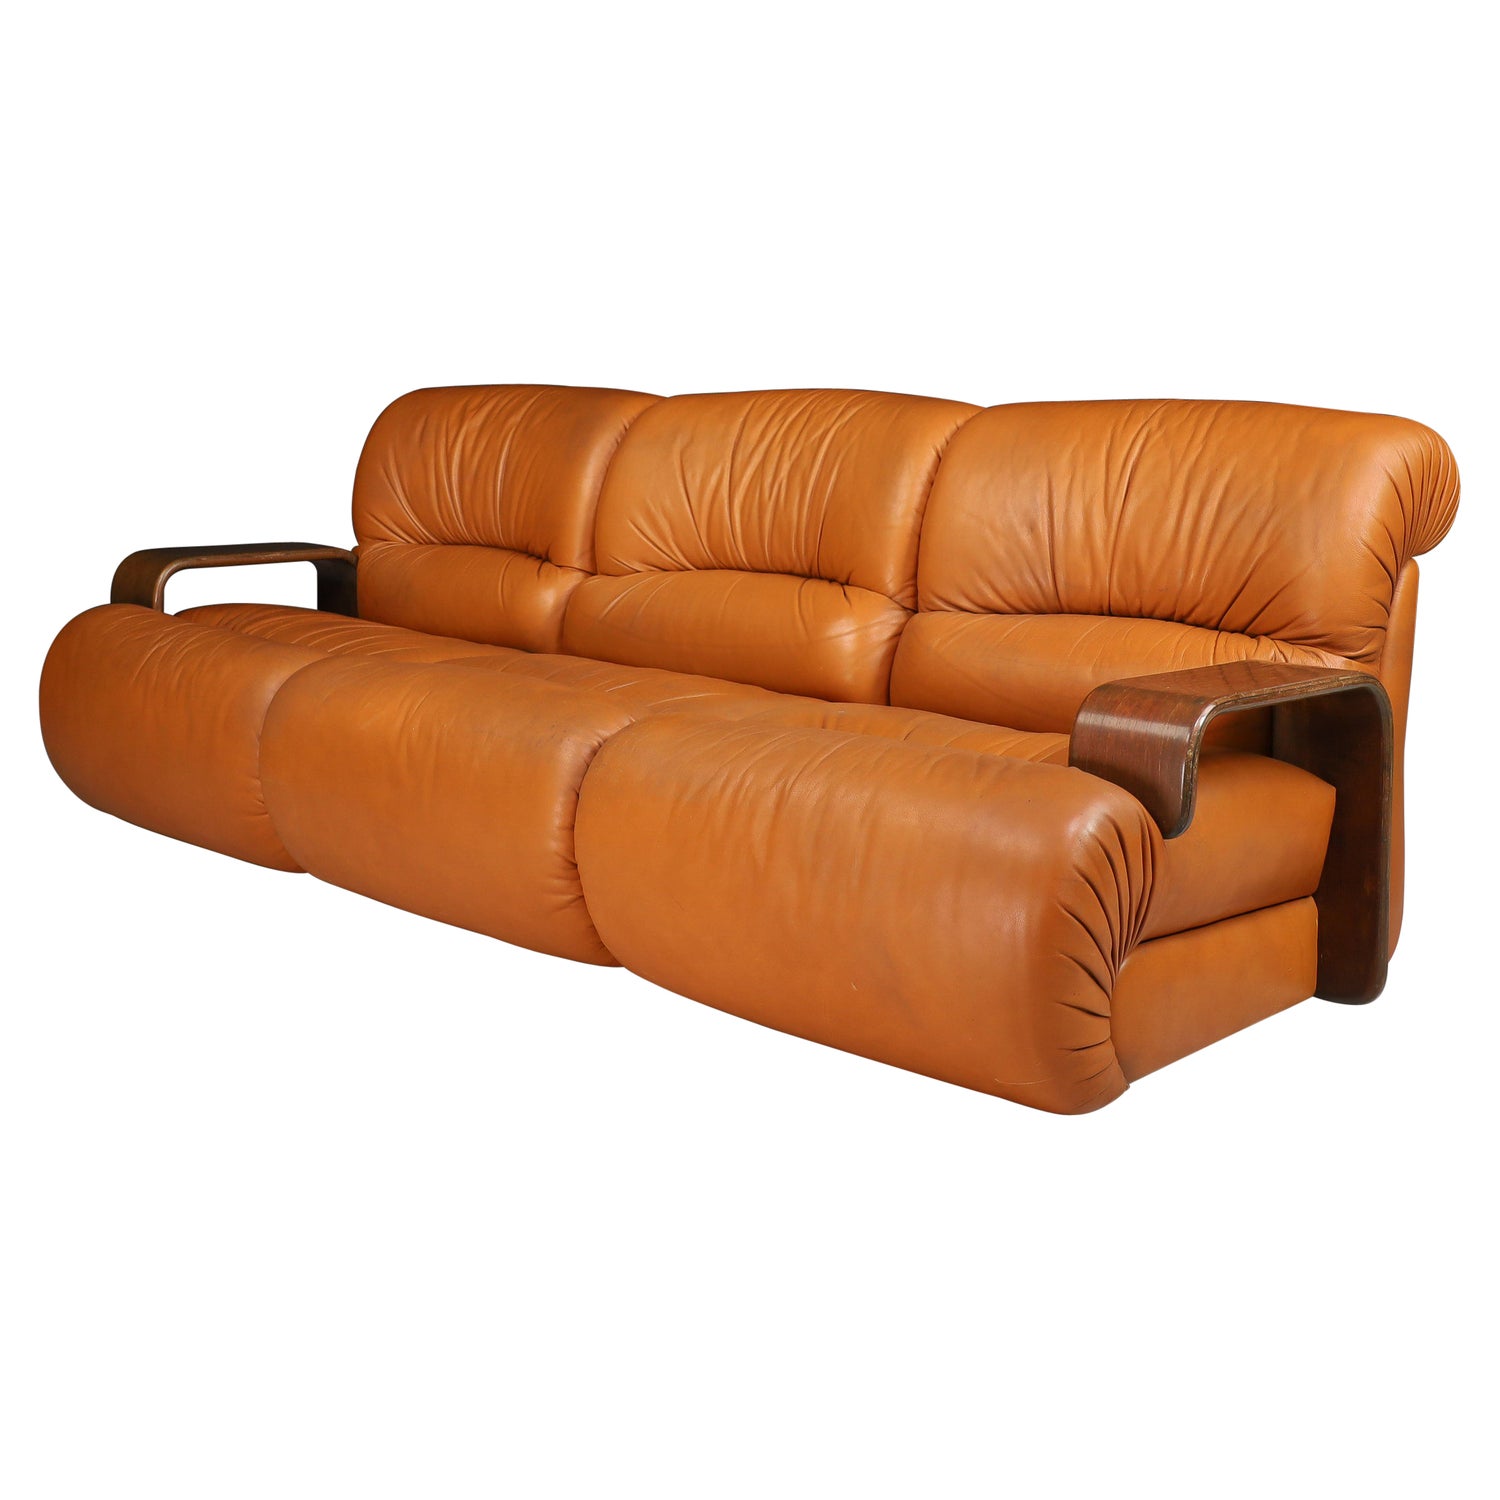 XL Lounge Sofa in Patinated Cognac Leather, Italy, 1970 For Sale at 1stDibs